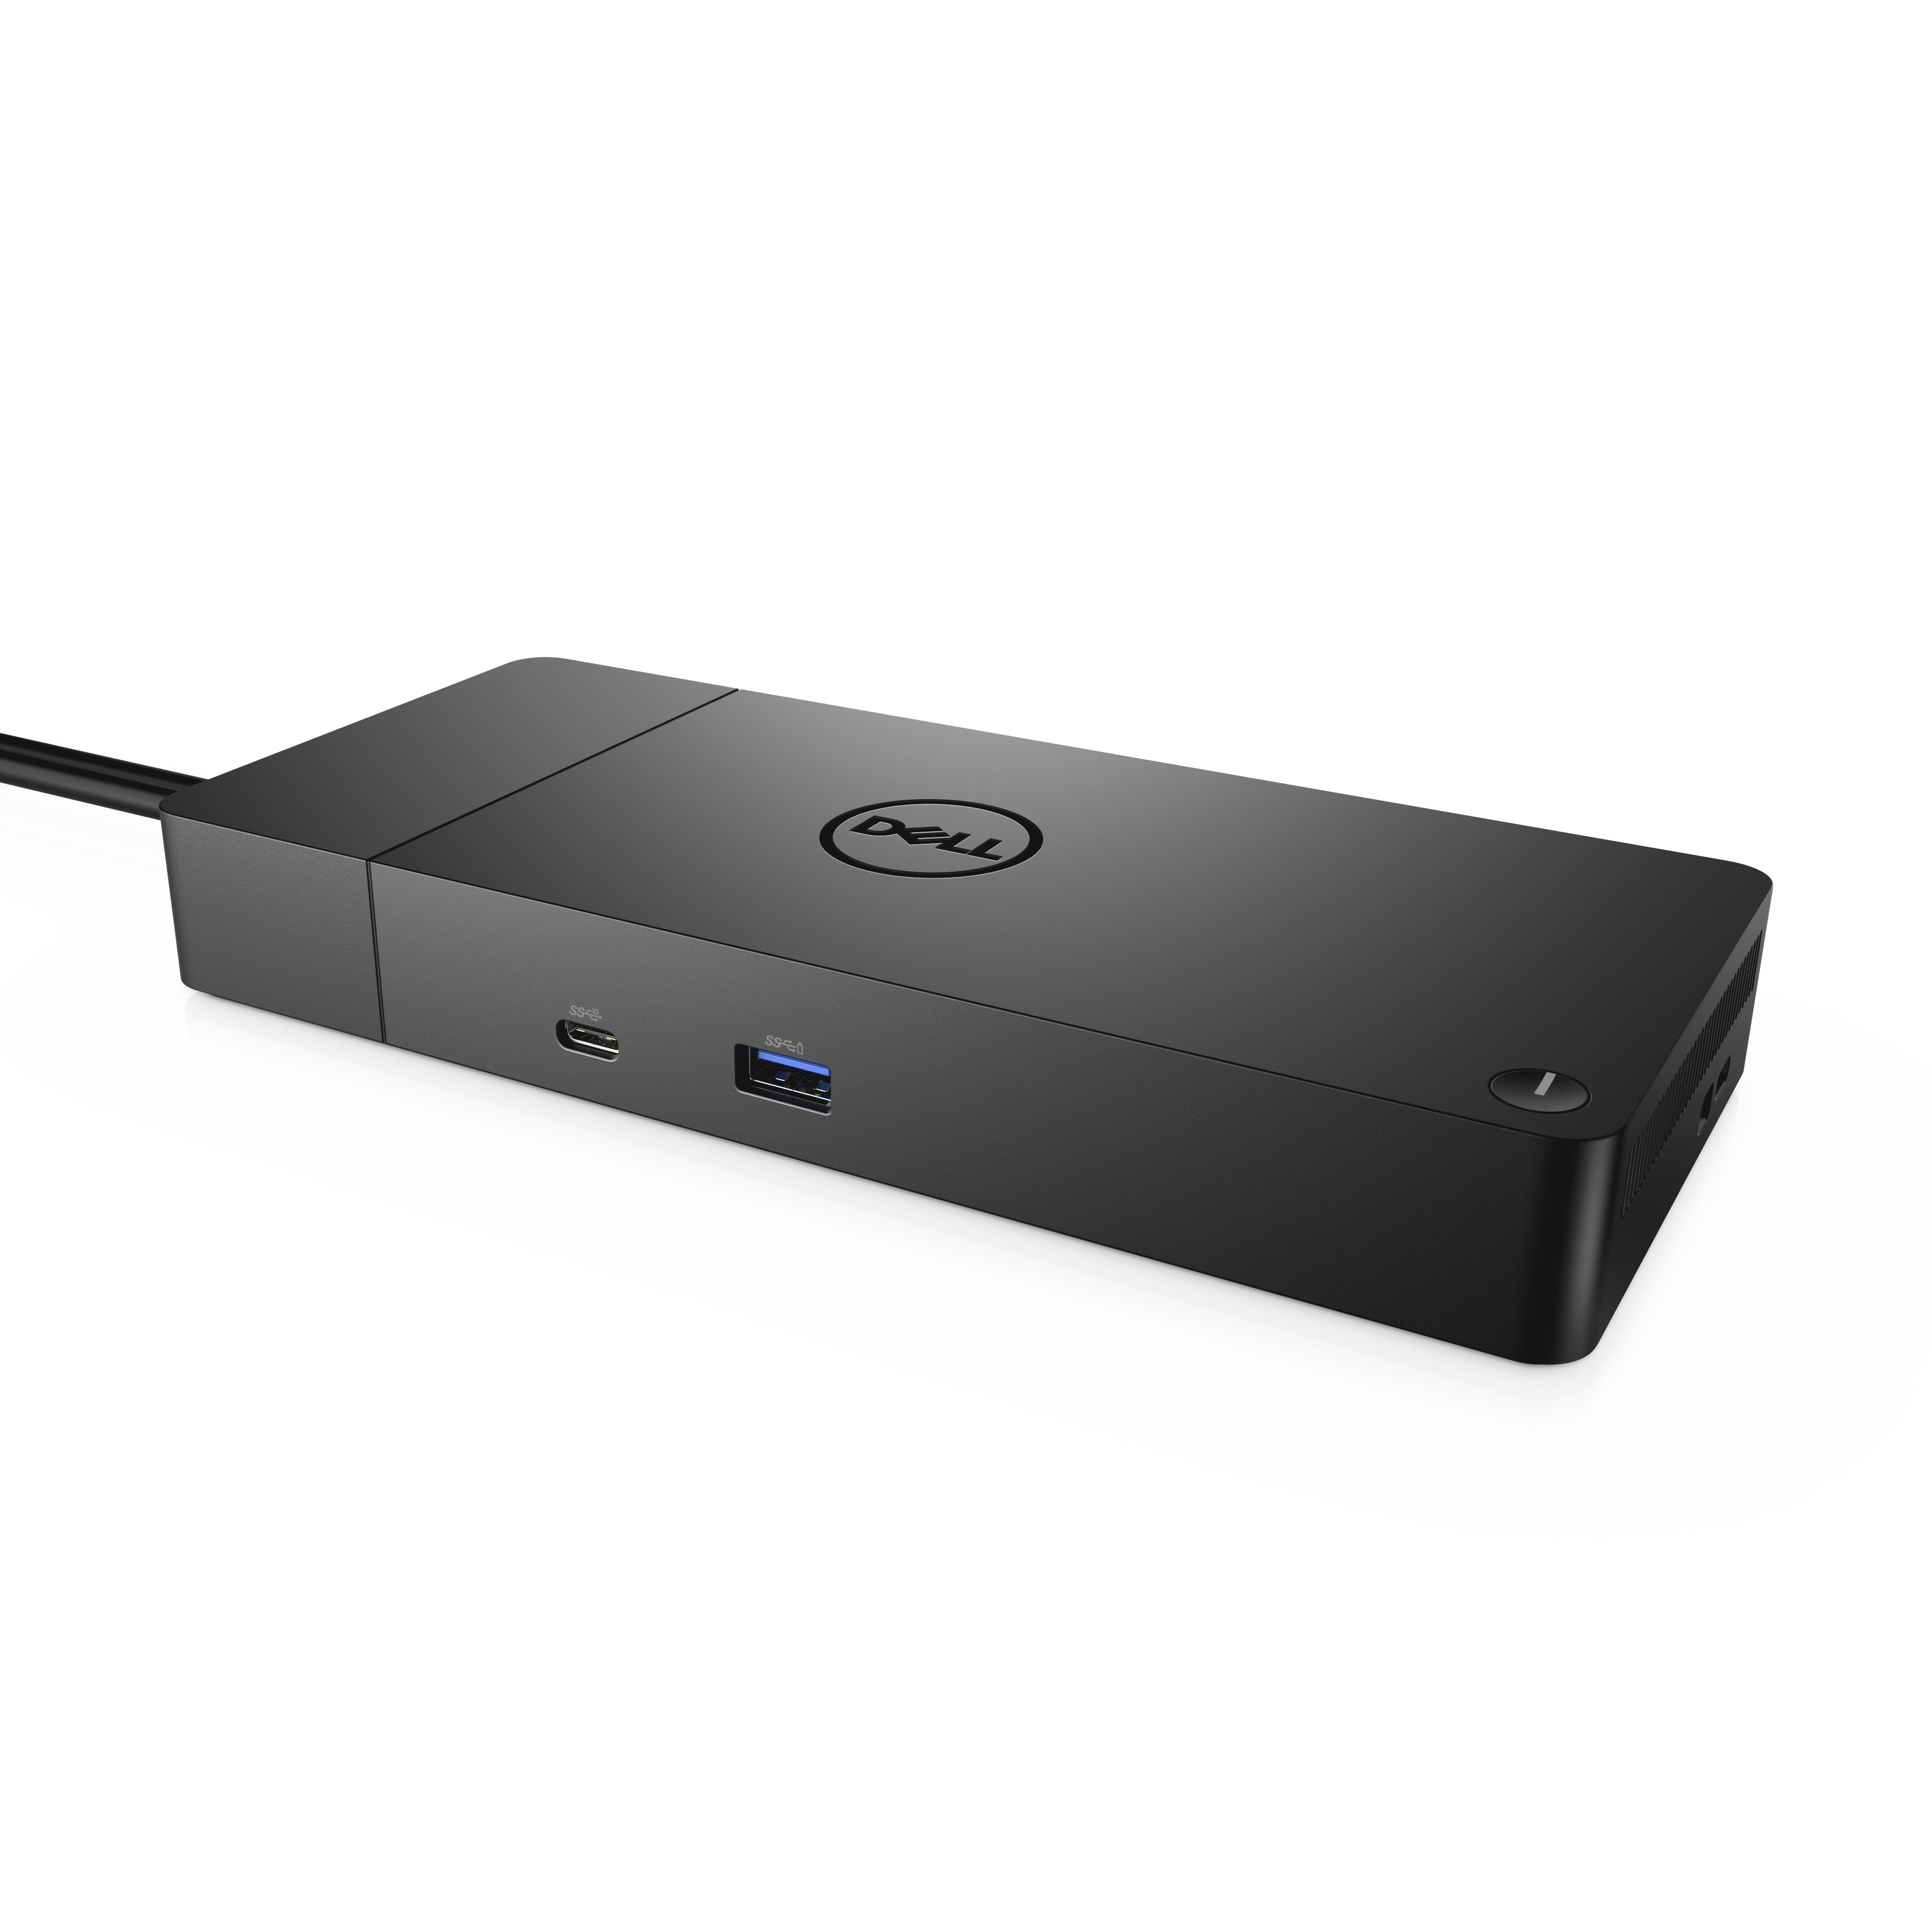 Dell Performance Dock Wd19dcs 240w Dell-wd19dcs - WC01